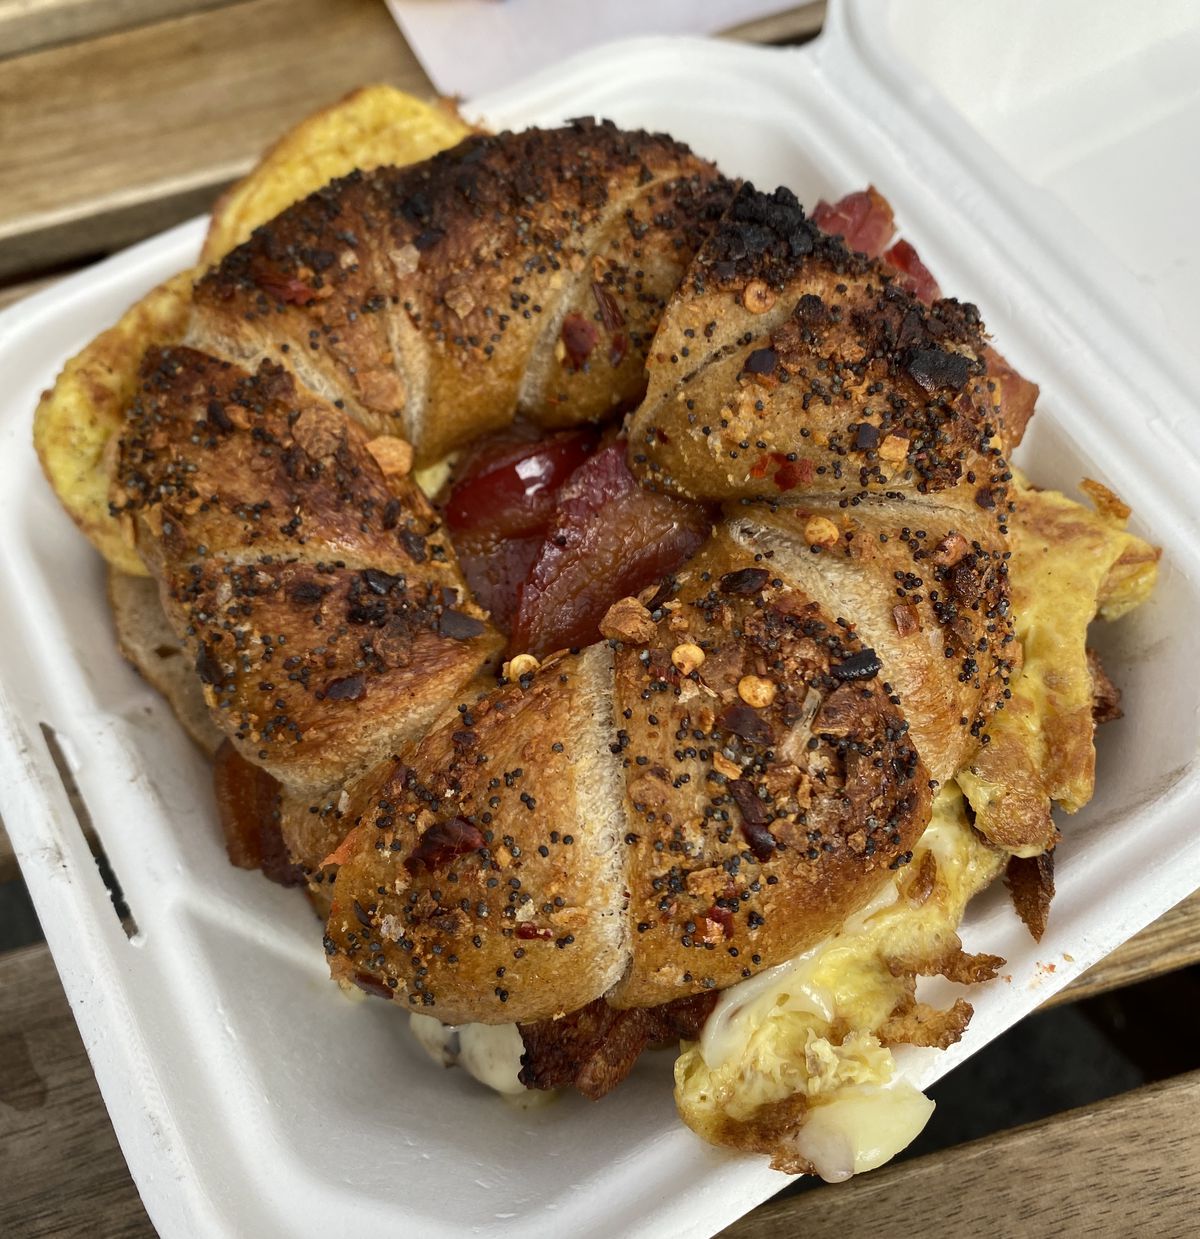 A bacon, egg, and cheese sandwich on a toasted everything bagel with red pepper flakes sits in a cardboard white takeout container